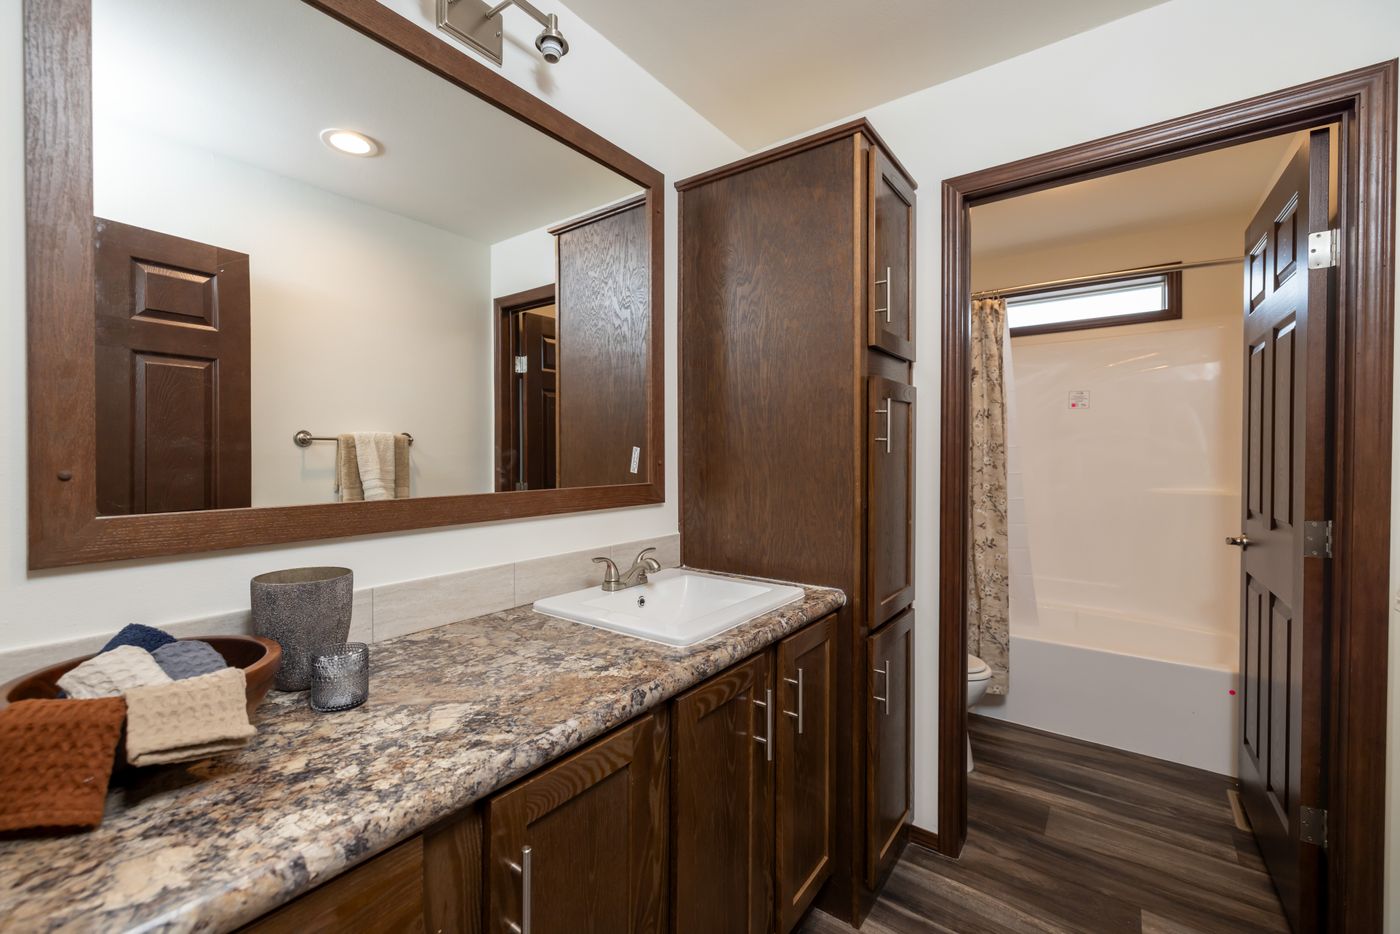 The LEGACY 327 Guest Bathroom. This Manufactured Mobile Home features 3 bedrooms and 2 baths.